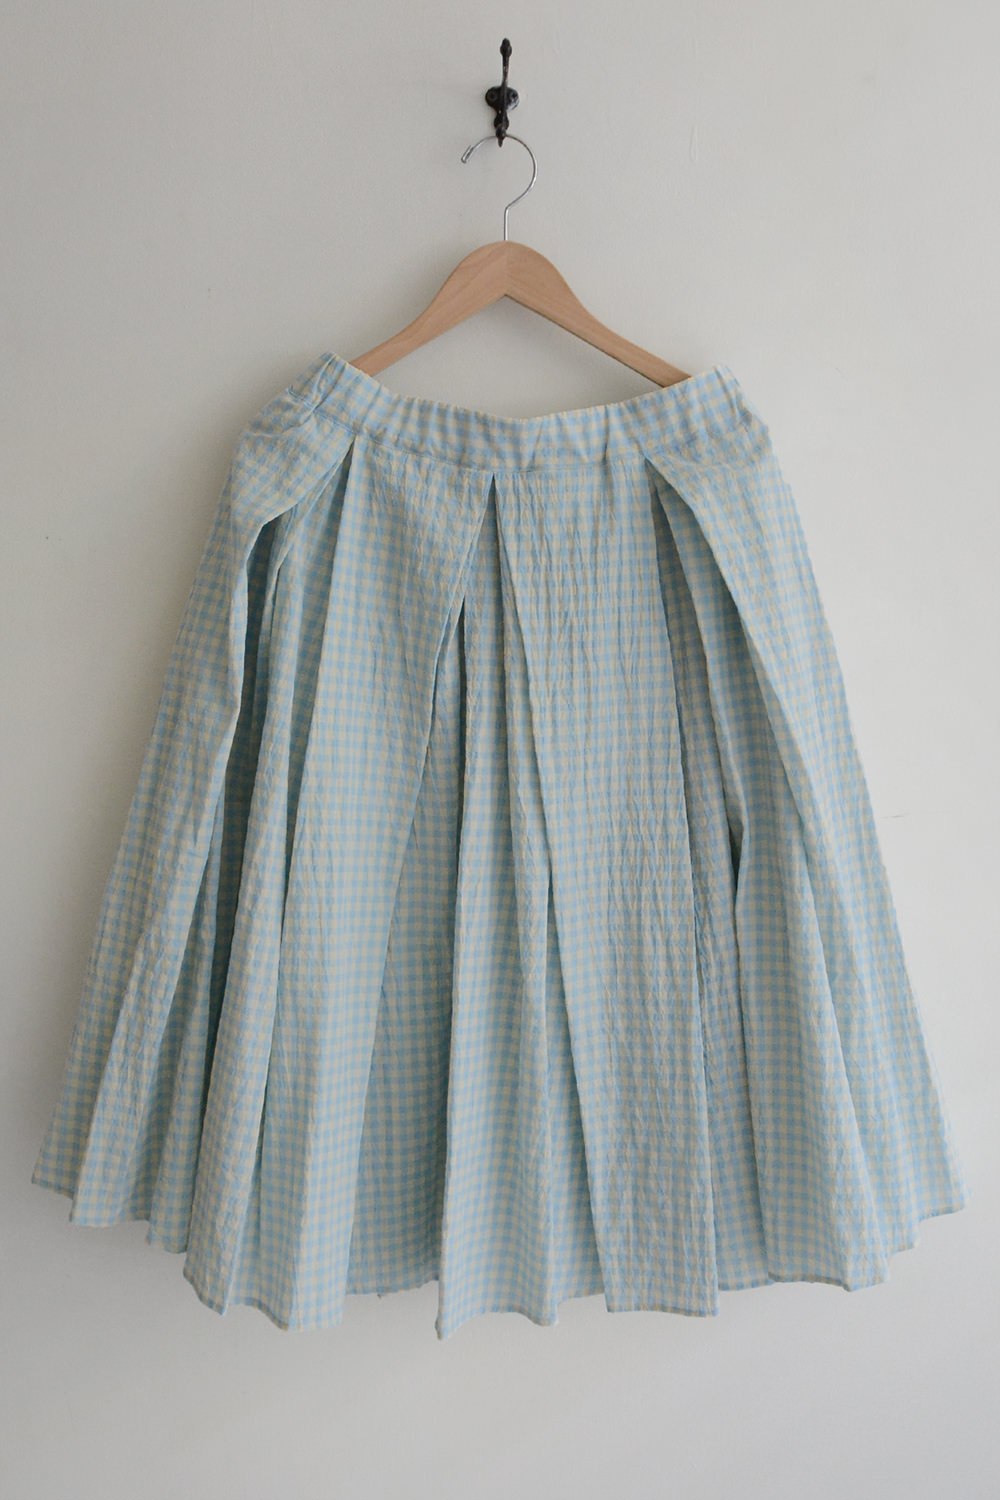 makie, makie home, apuntob(a.b)、a.b、women's、ウィメンズ、made in Italy、skirt、スカート